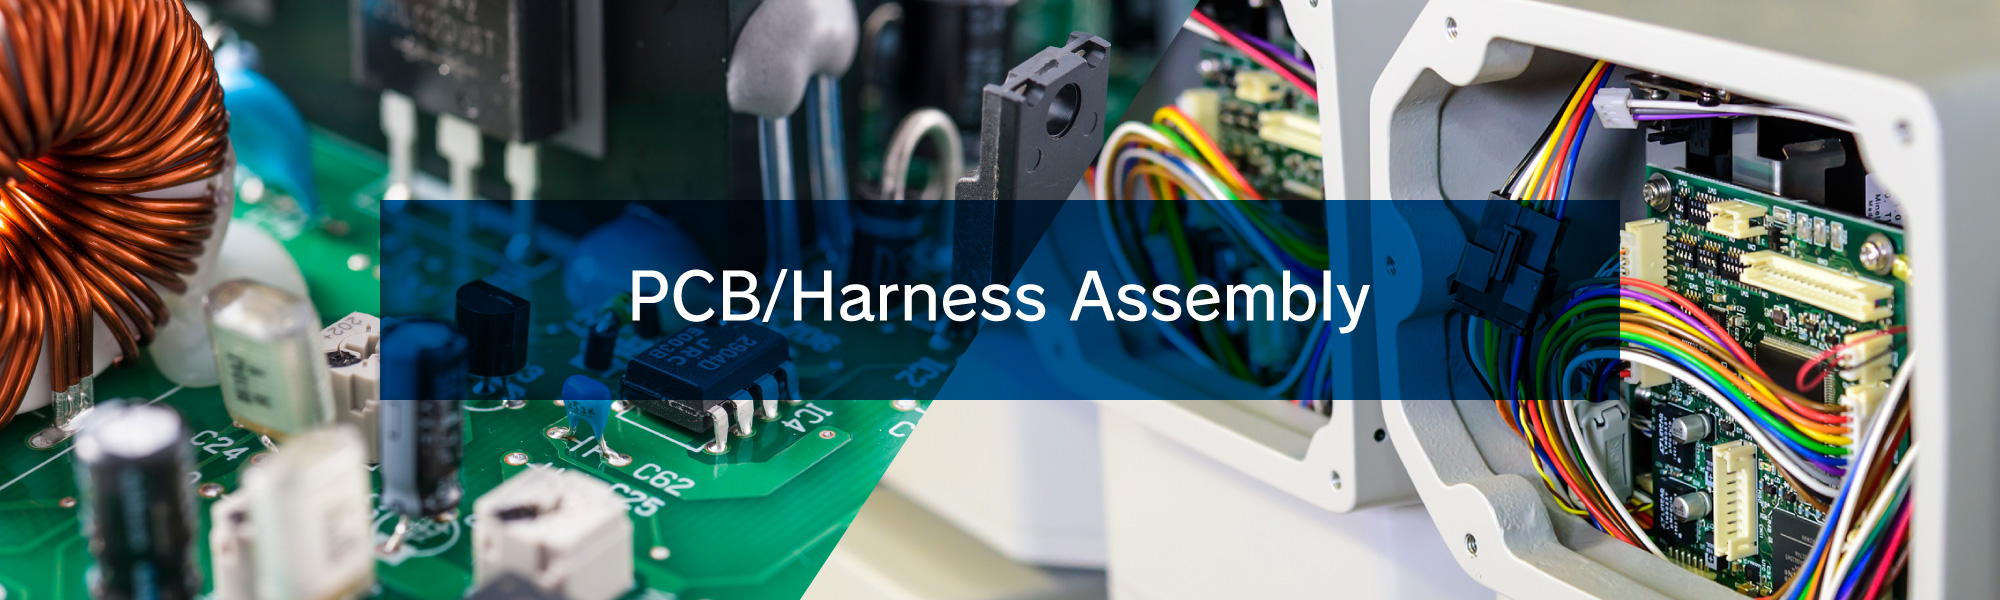 PCB/Harness Assembly